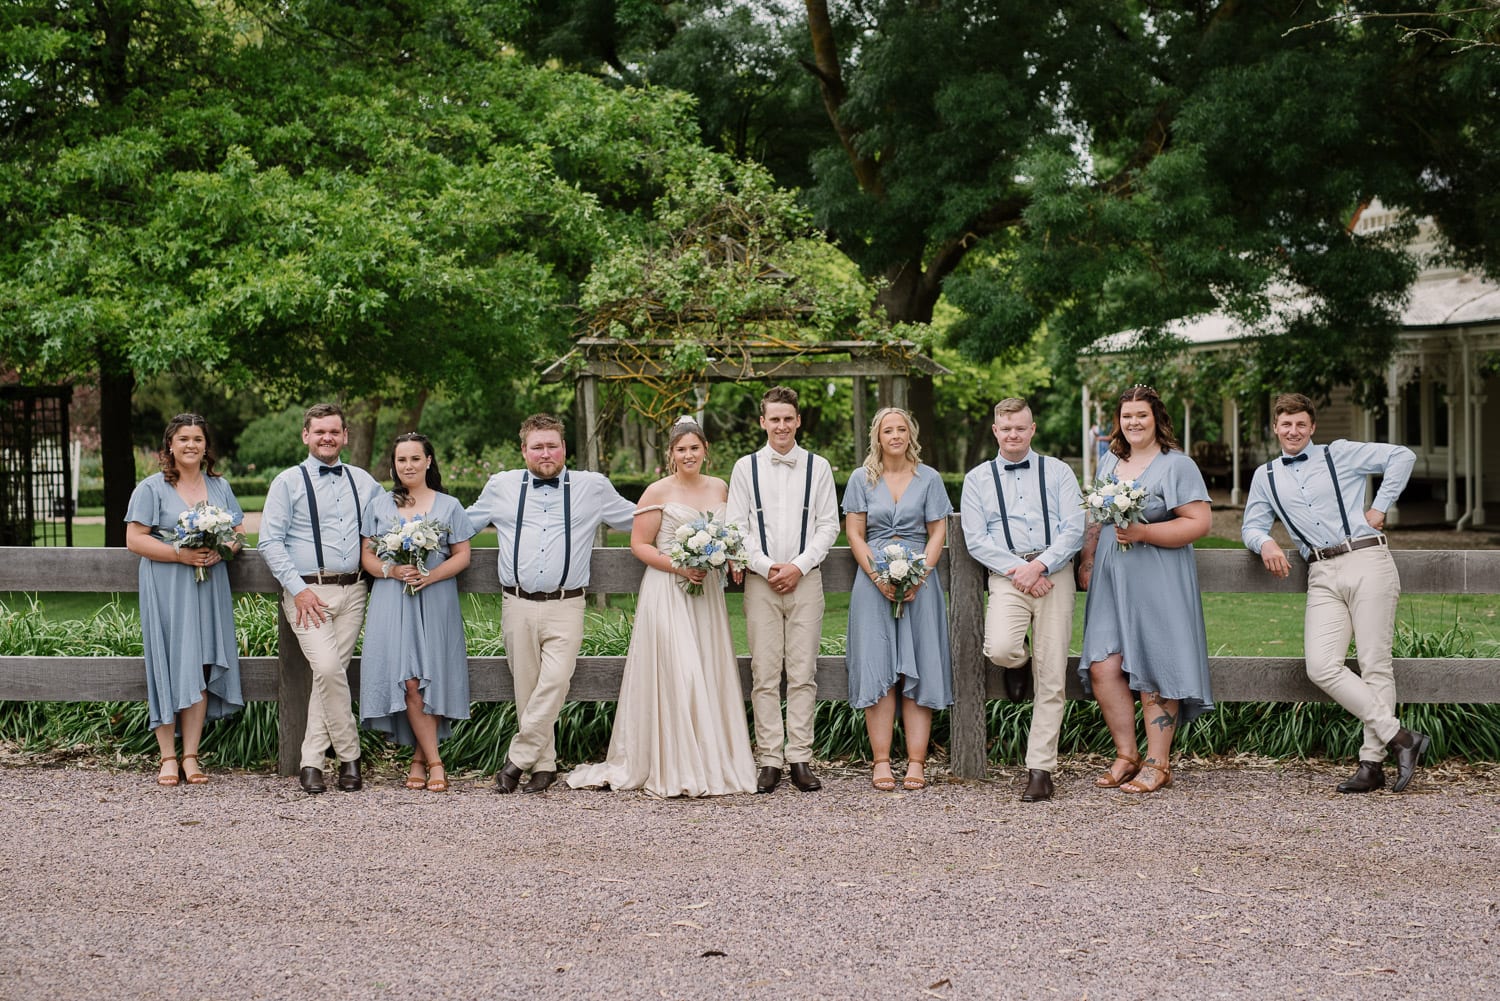 Bridal party photo in relaxed country style